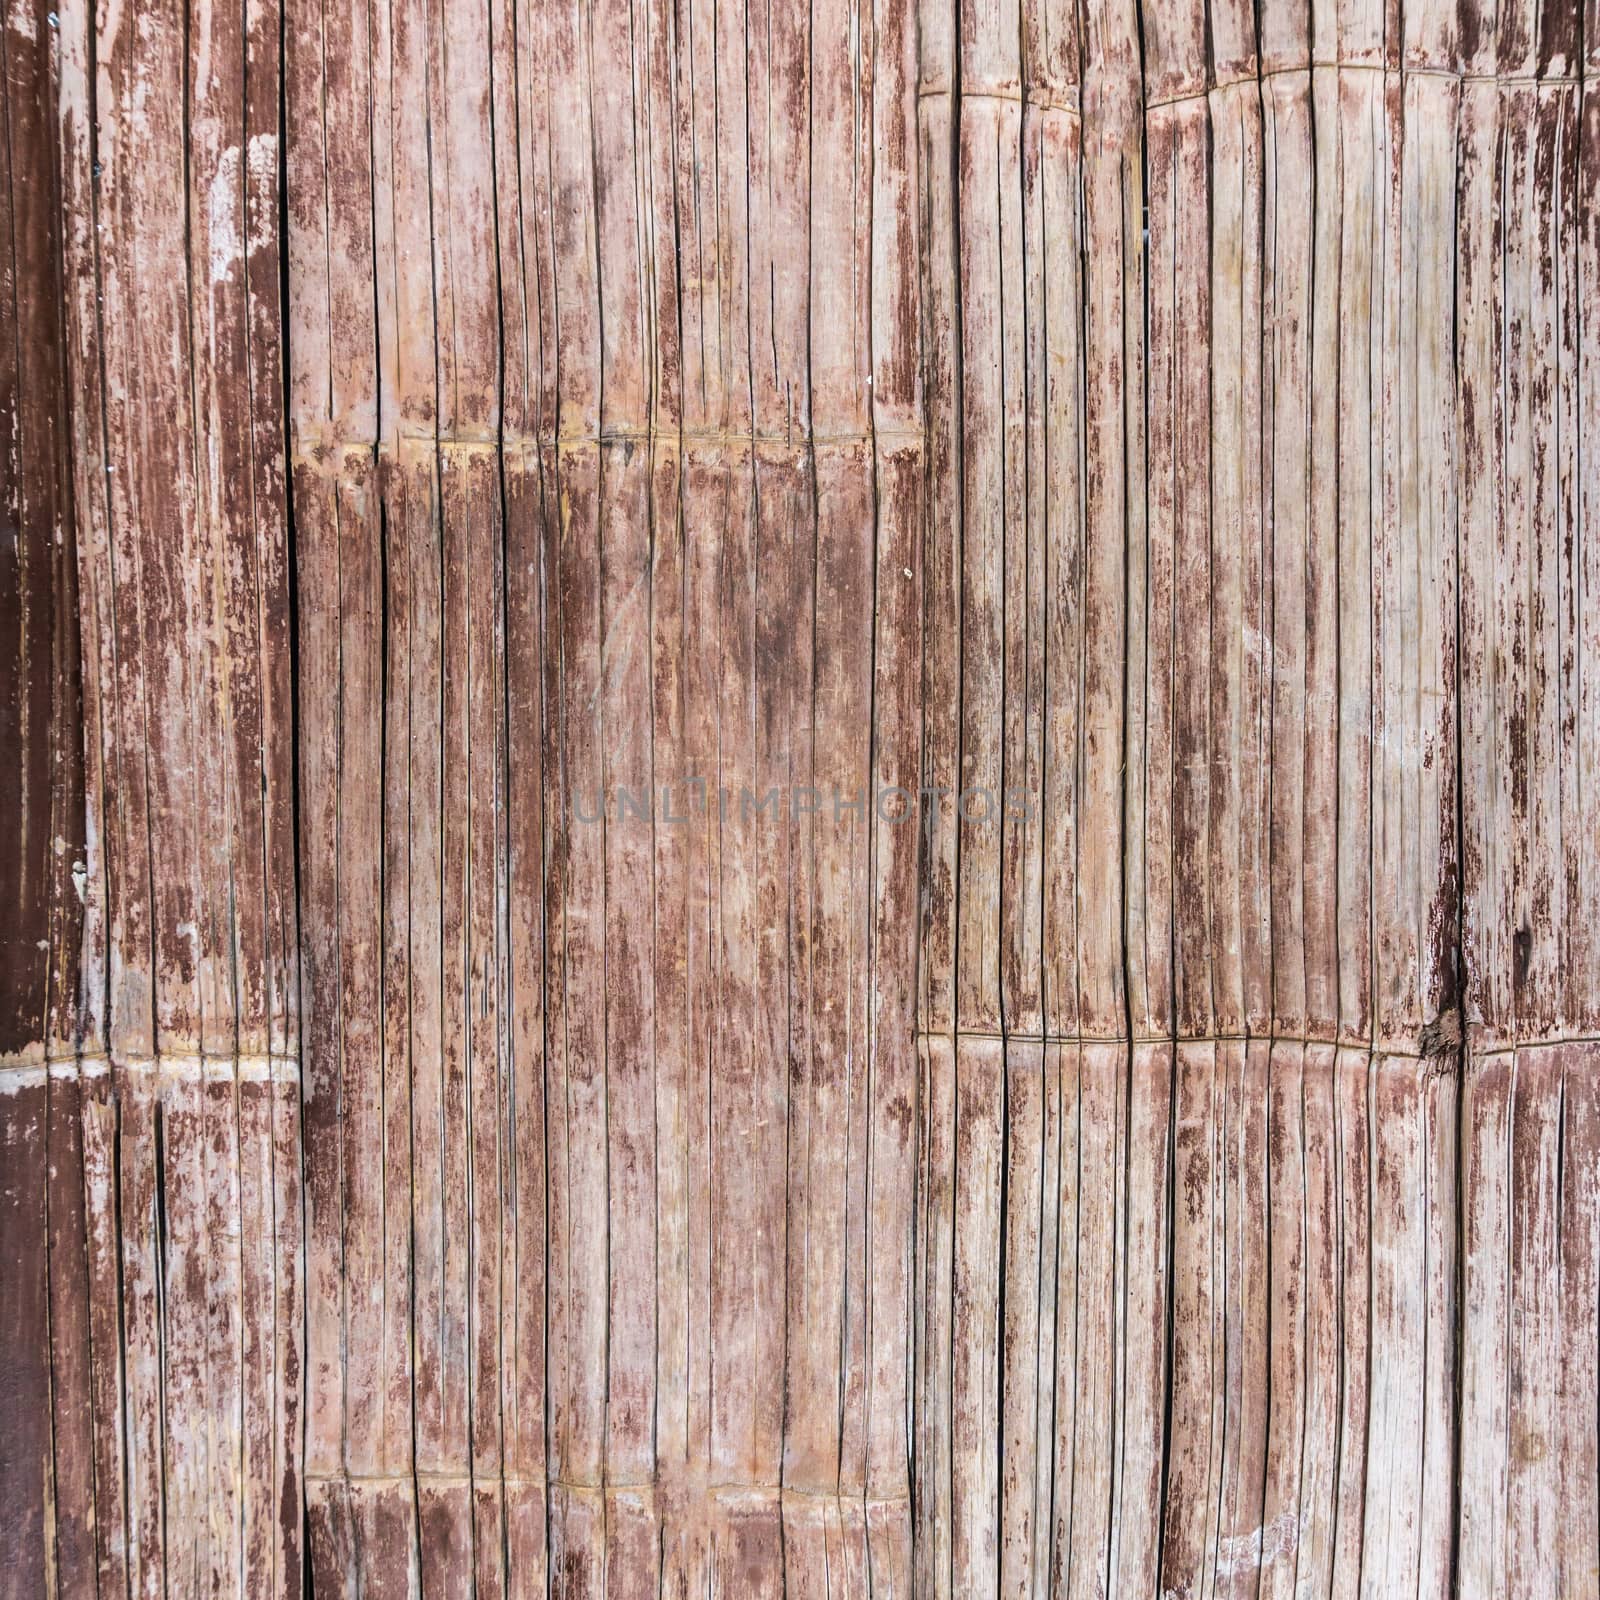 High resolution wood texture background .